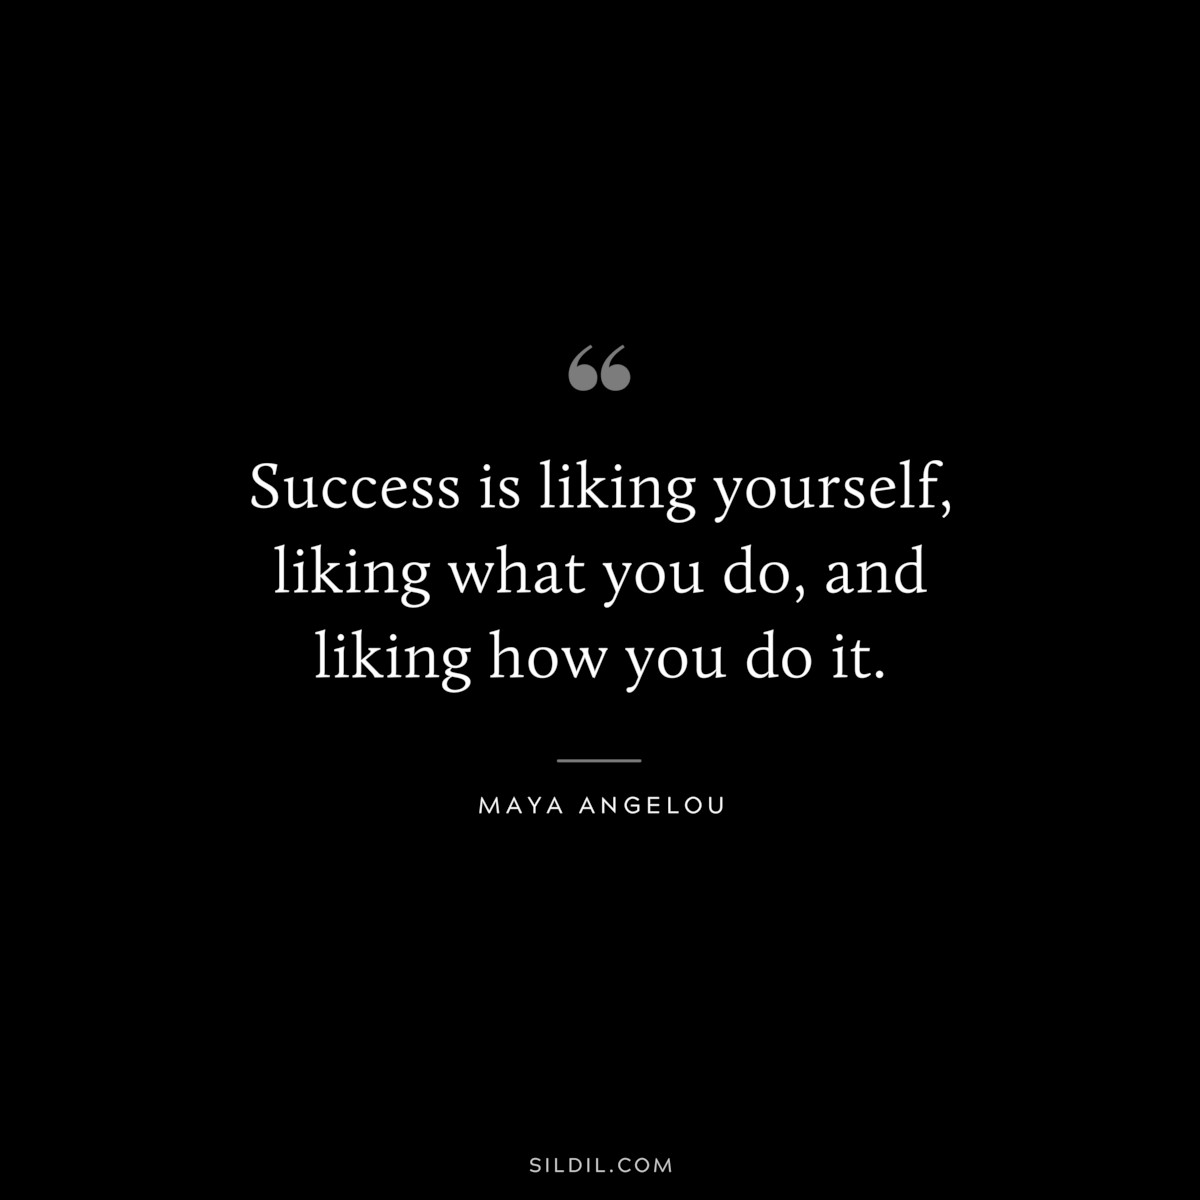 Success is liking yourself, liking what you do, and liking how you do it. ― Maya Angelou